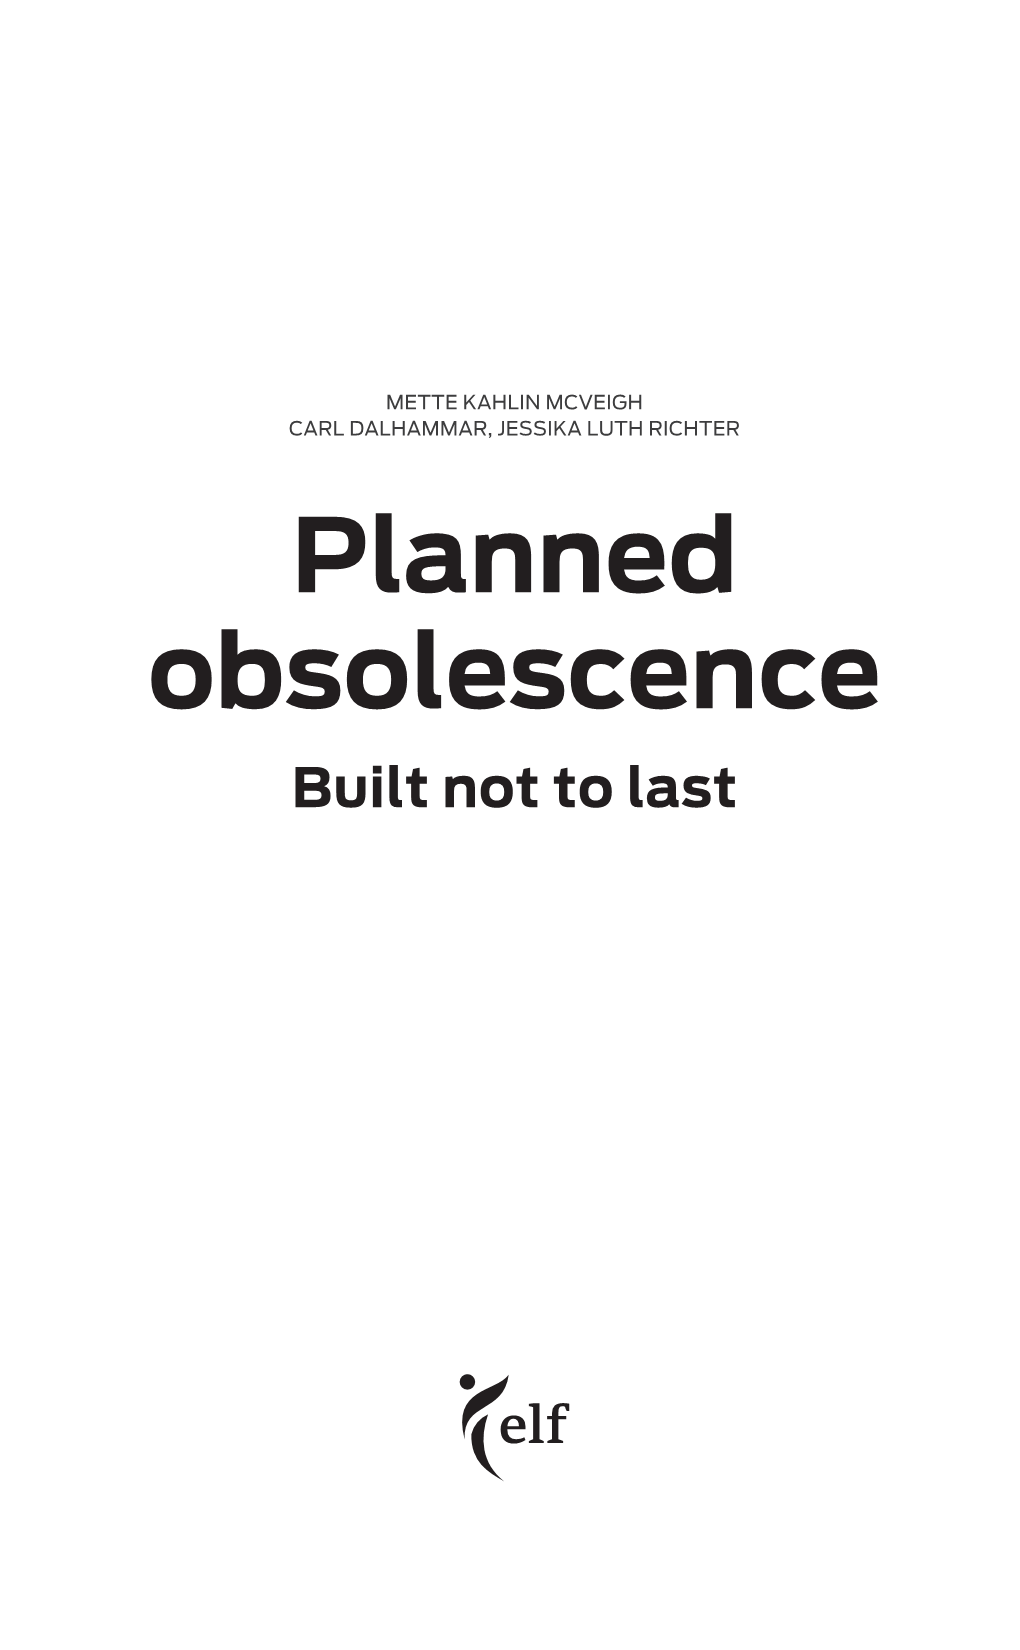 Planned Obsolescence Built Not to Last Planned Obsolescence Built Not to Last